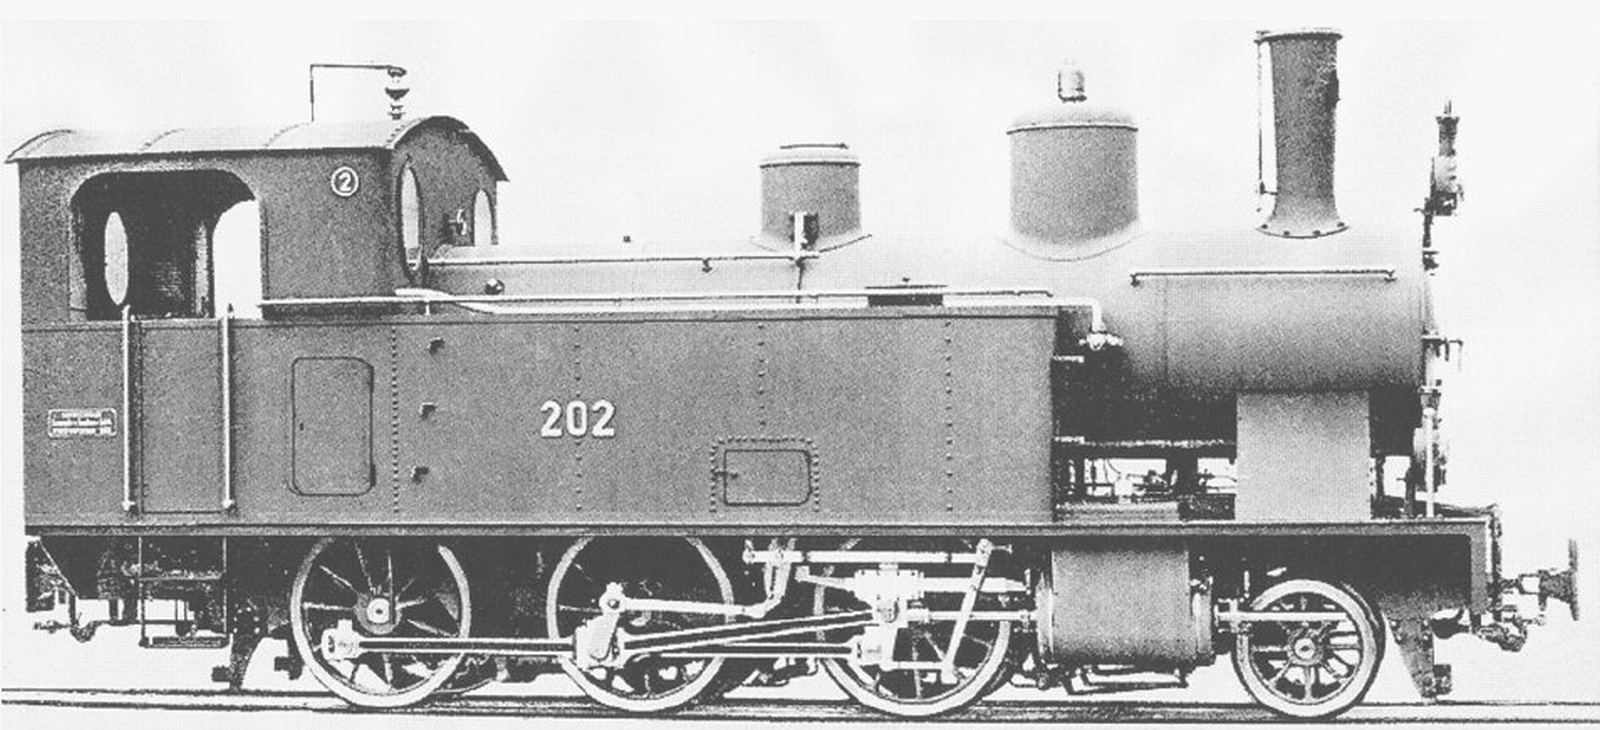 No. 202 on an SLM works photo